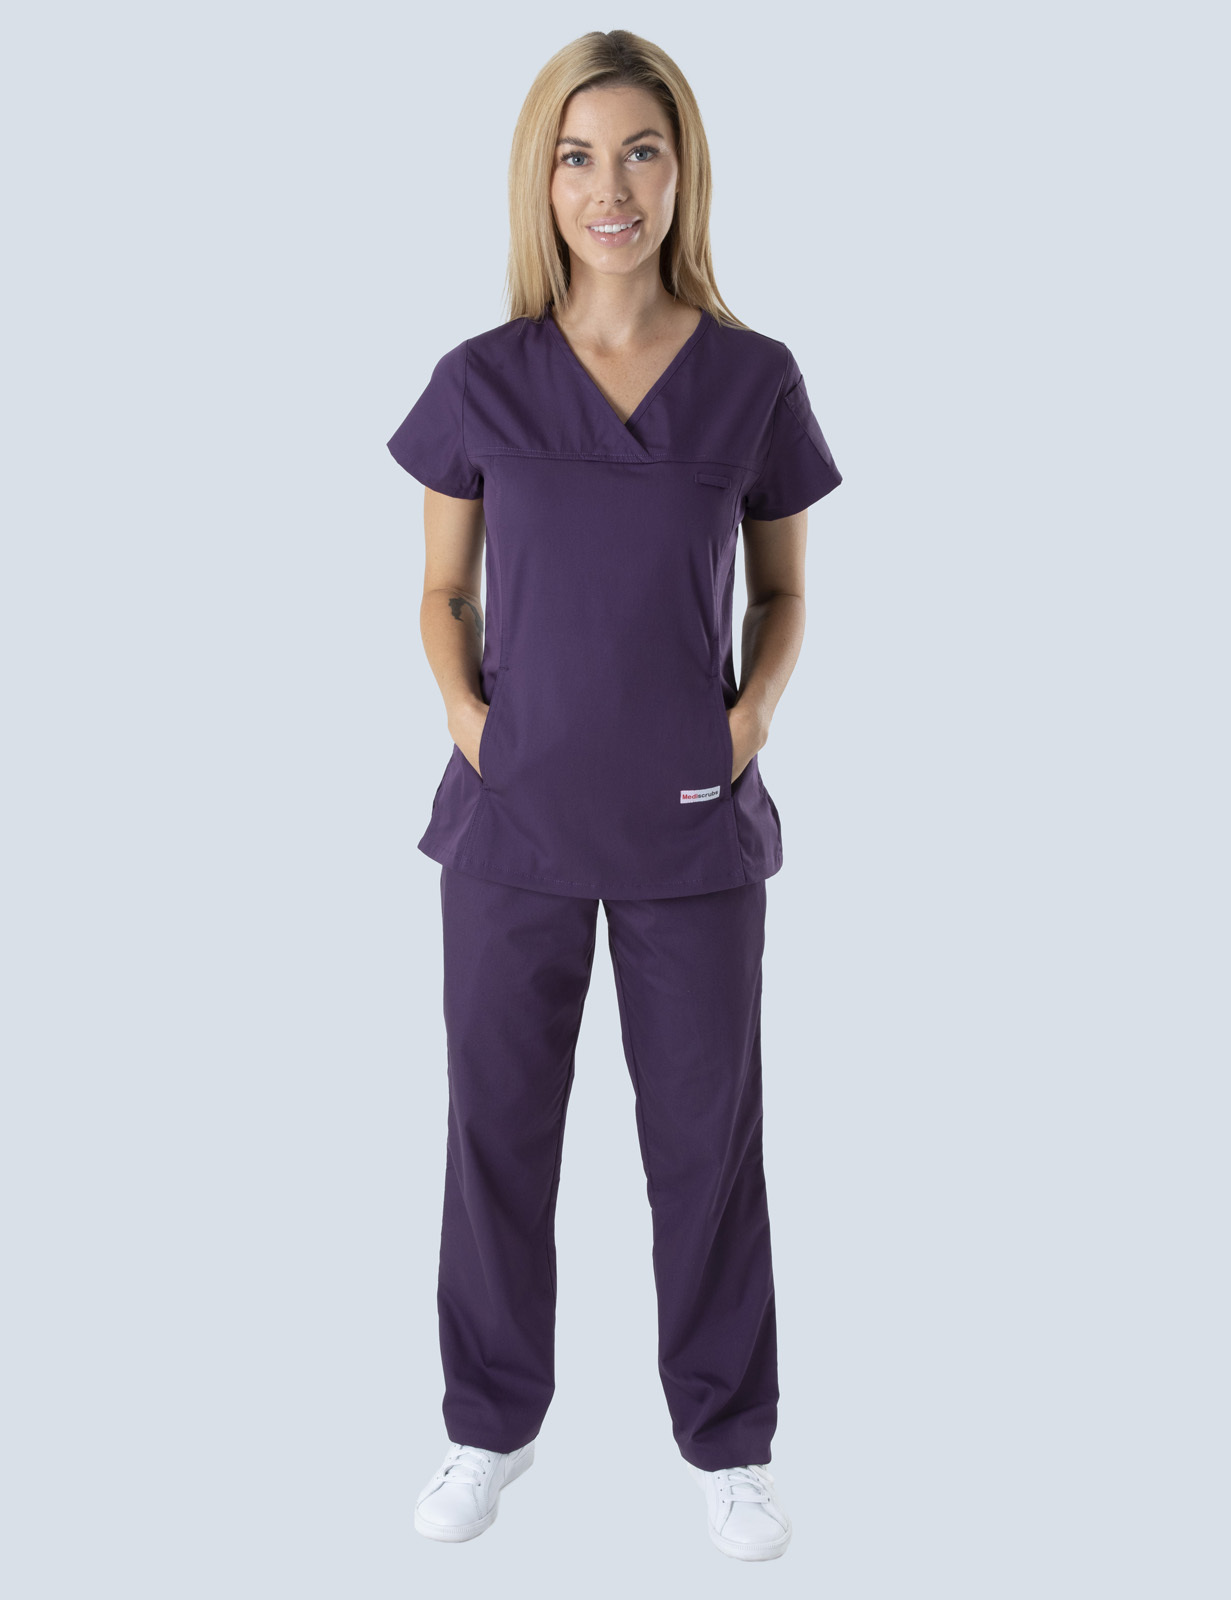 SCPU Hospital - Midwife (Women's Fit Solid Scrub Top and Cargo Pants in Aubergine incl Logos)